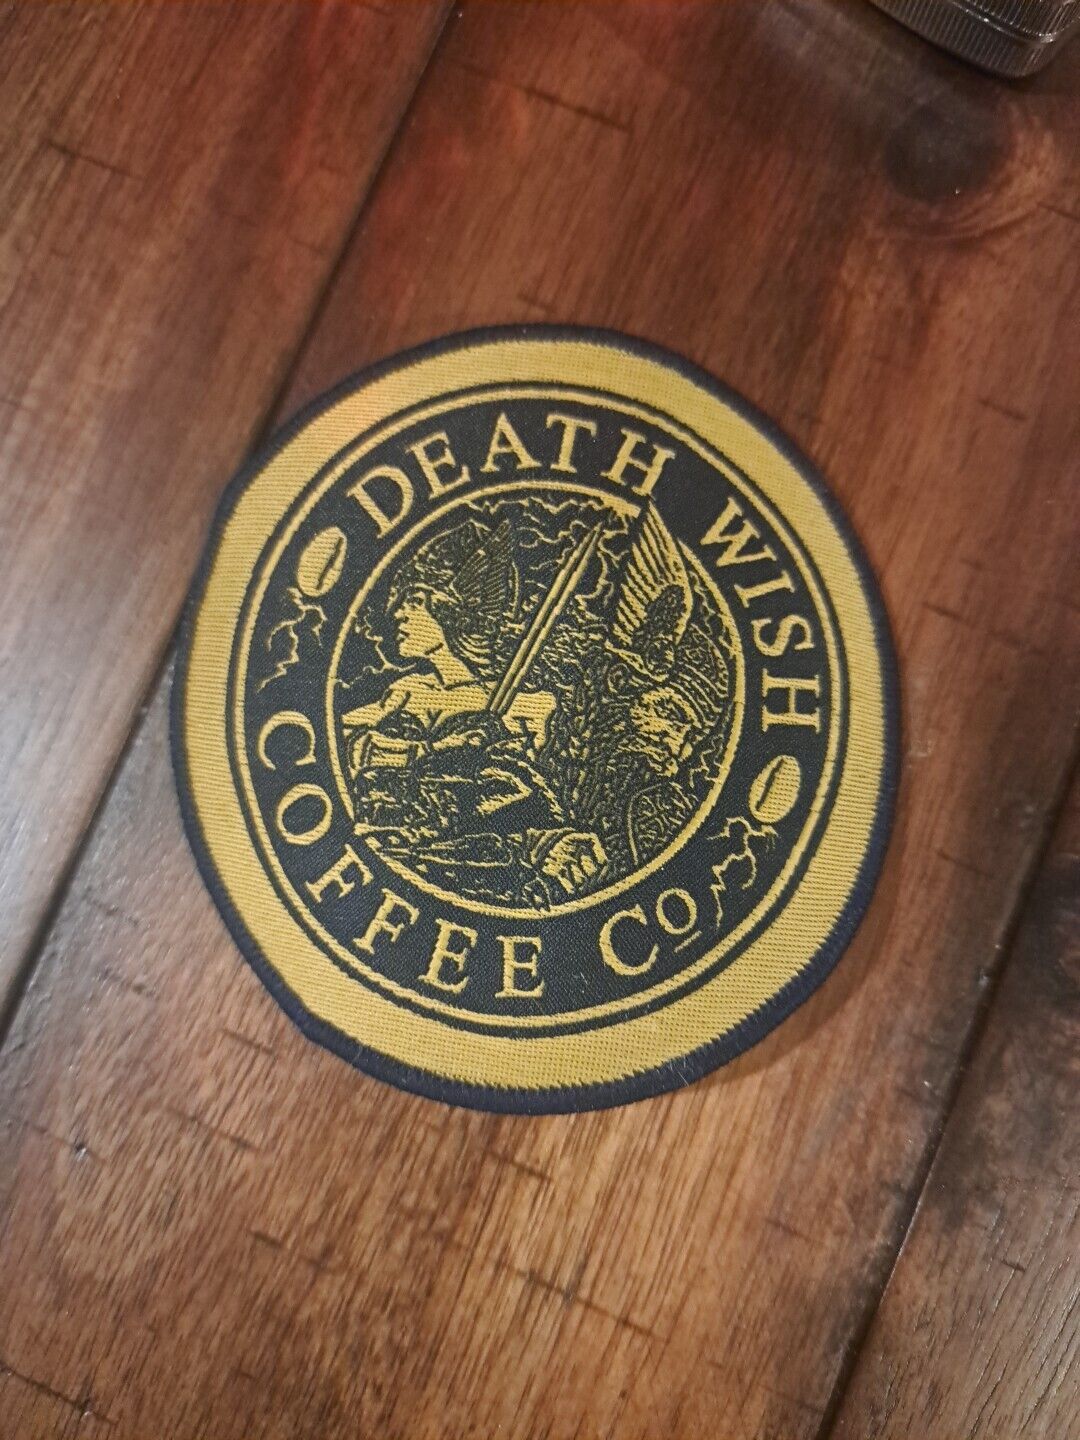 NEW DEATH WISH COFFEE Limited PATCH THOR VALKYRIE VIKING VALHALLA Java Not Mug